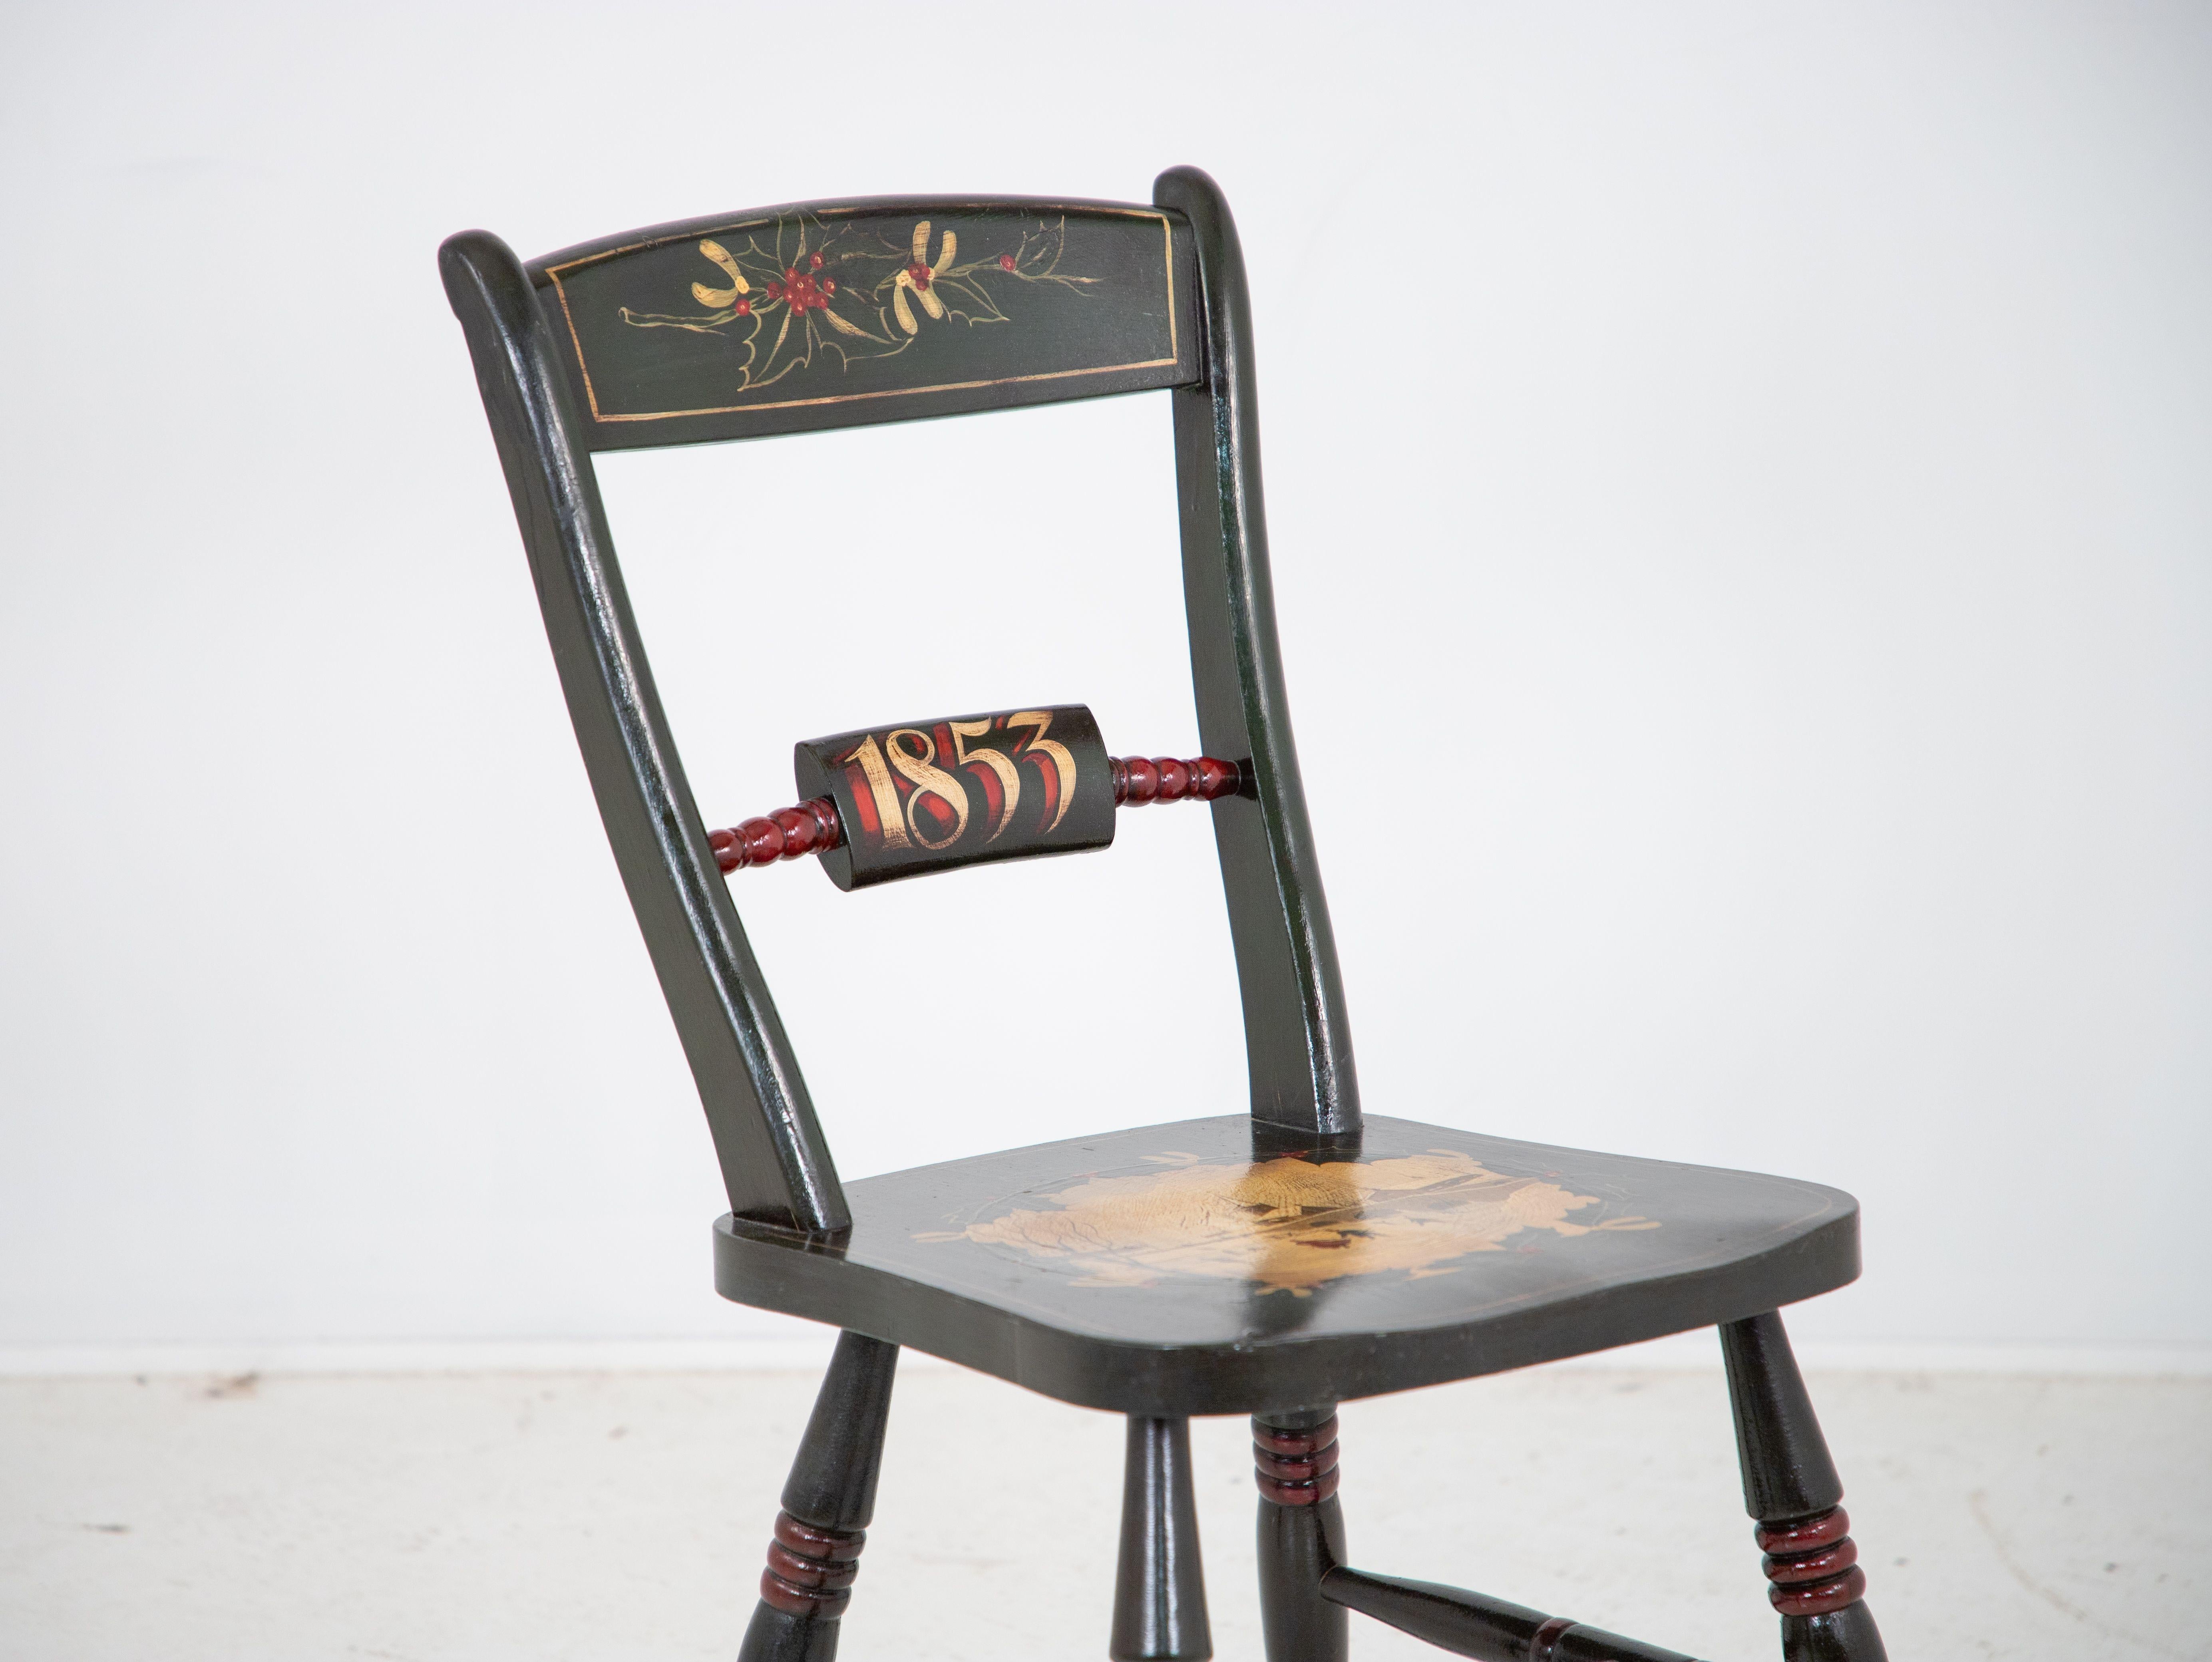 This antique side chair painted in green is a celebration of Christmas. The back features a holly and berry design and the year 1853 in red and gold. The seat is painted with a stunning winter scene featuring a frozen pond with skaters, a bridge,